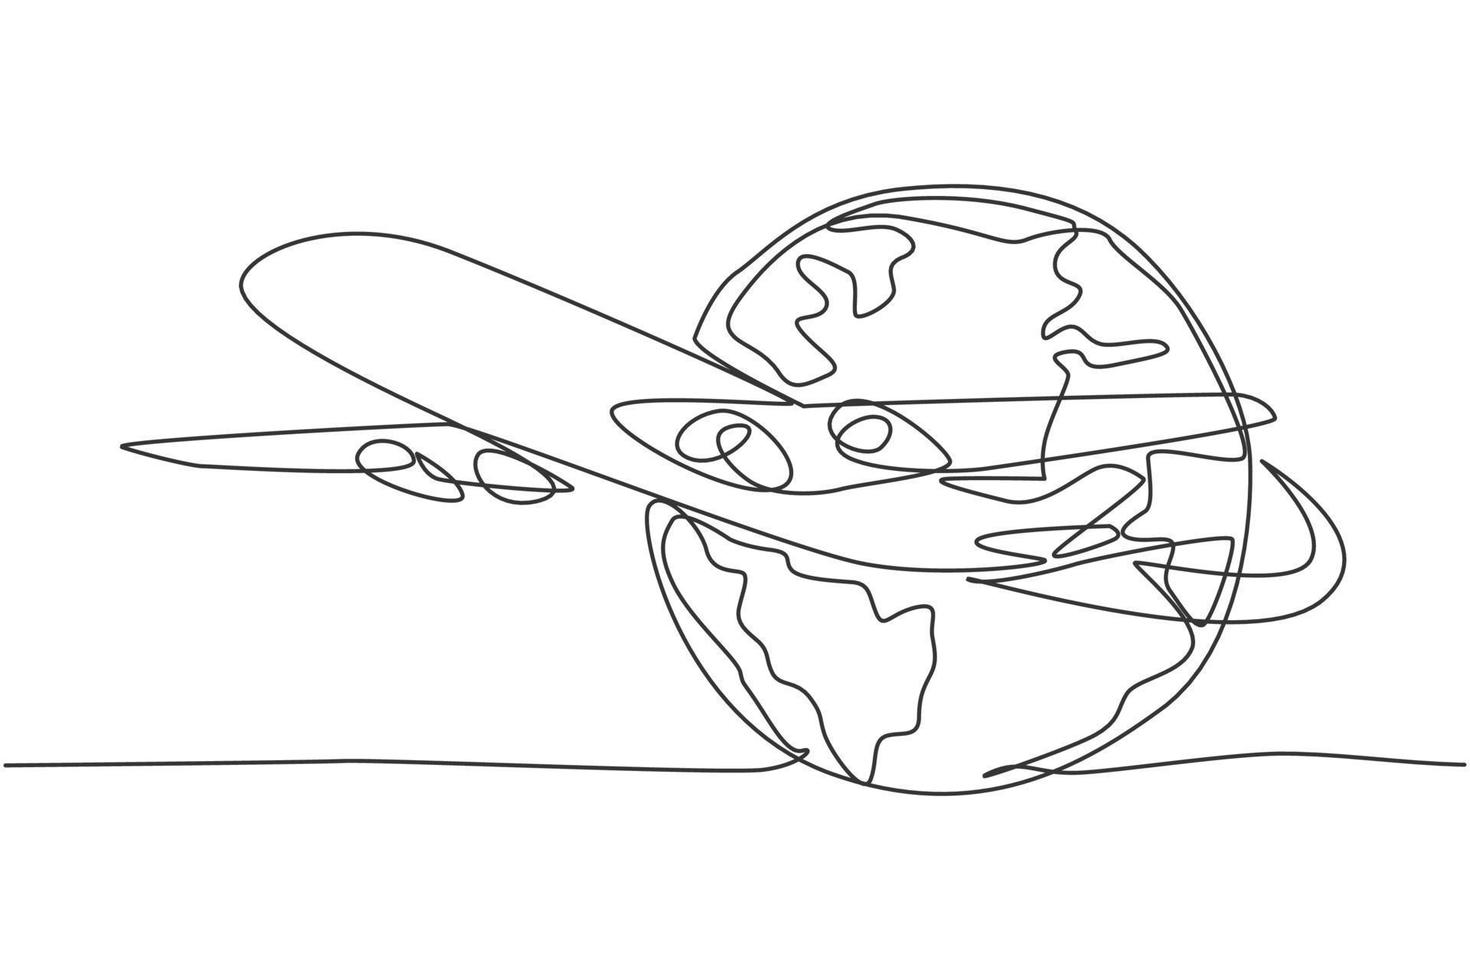 Airplane around the earth. Single continuous line world traveling graphic icon. Simple one line doodle for holiday vacation concept. Isolated vector illustration minimalist design on white background